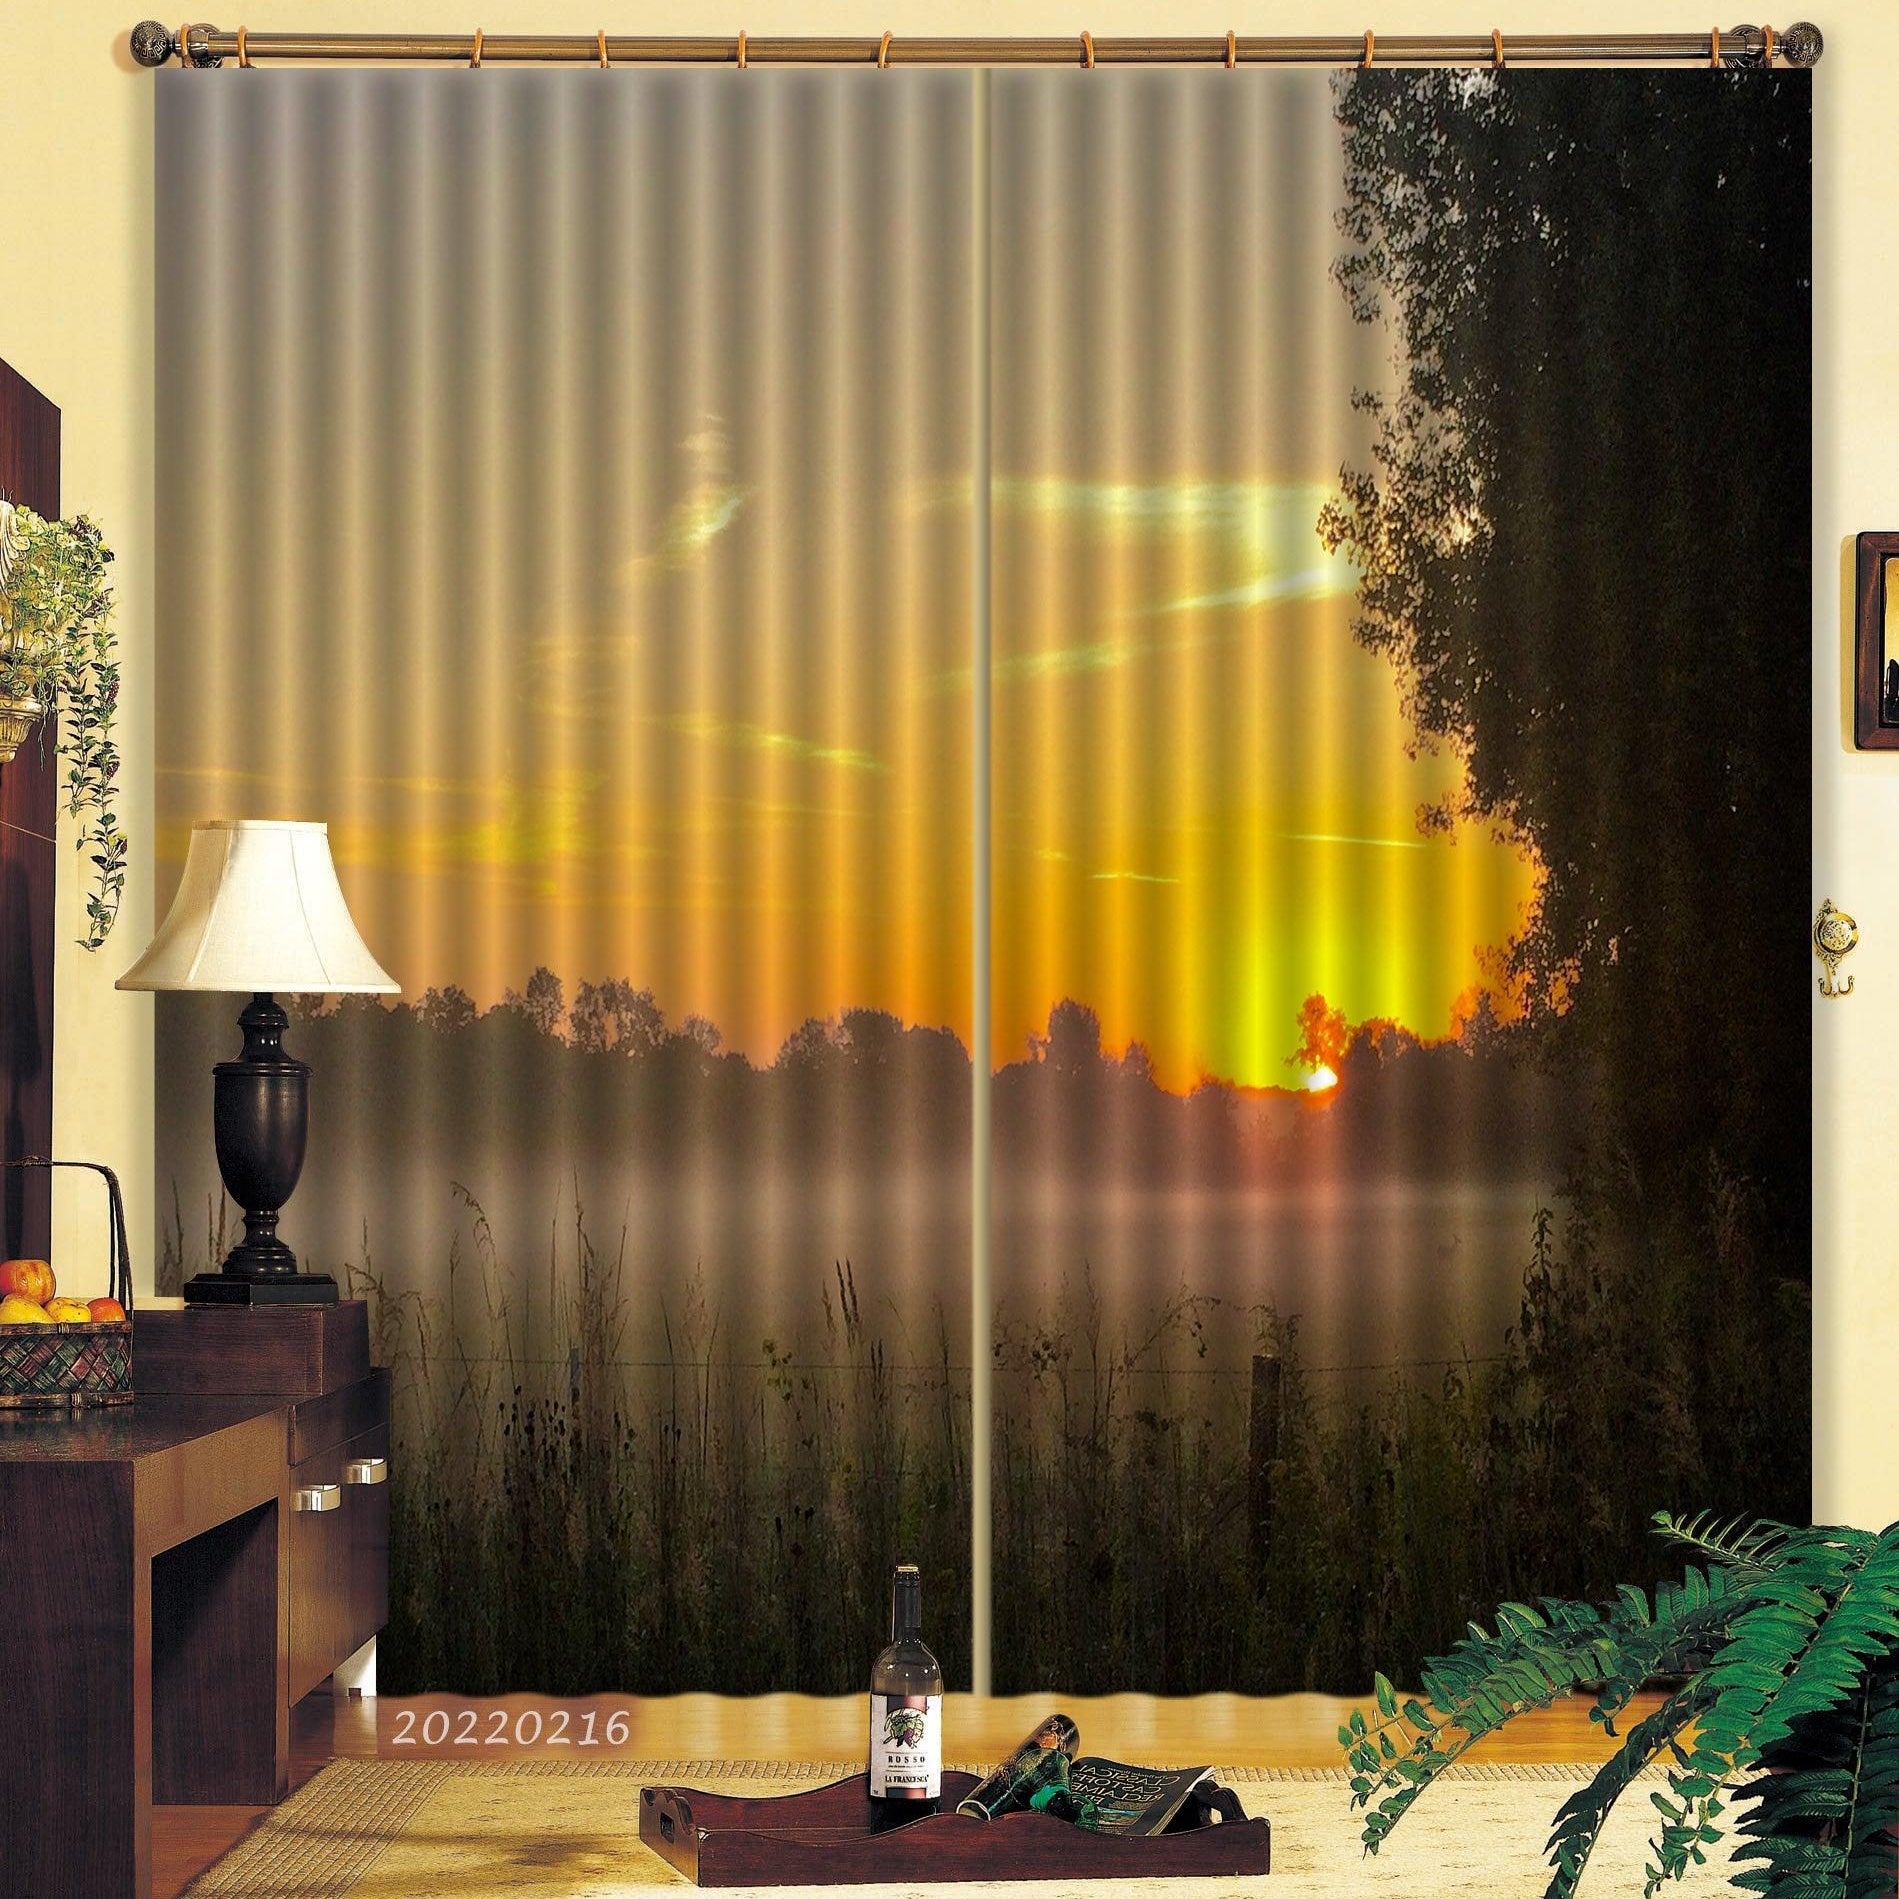 3D Woods Tall Grass Fog Sunrise Scenery Curtains and Drapes GD 2003- Jess Art Decoration